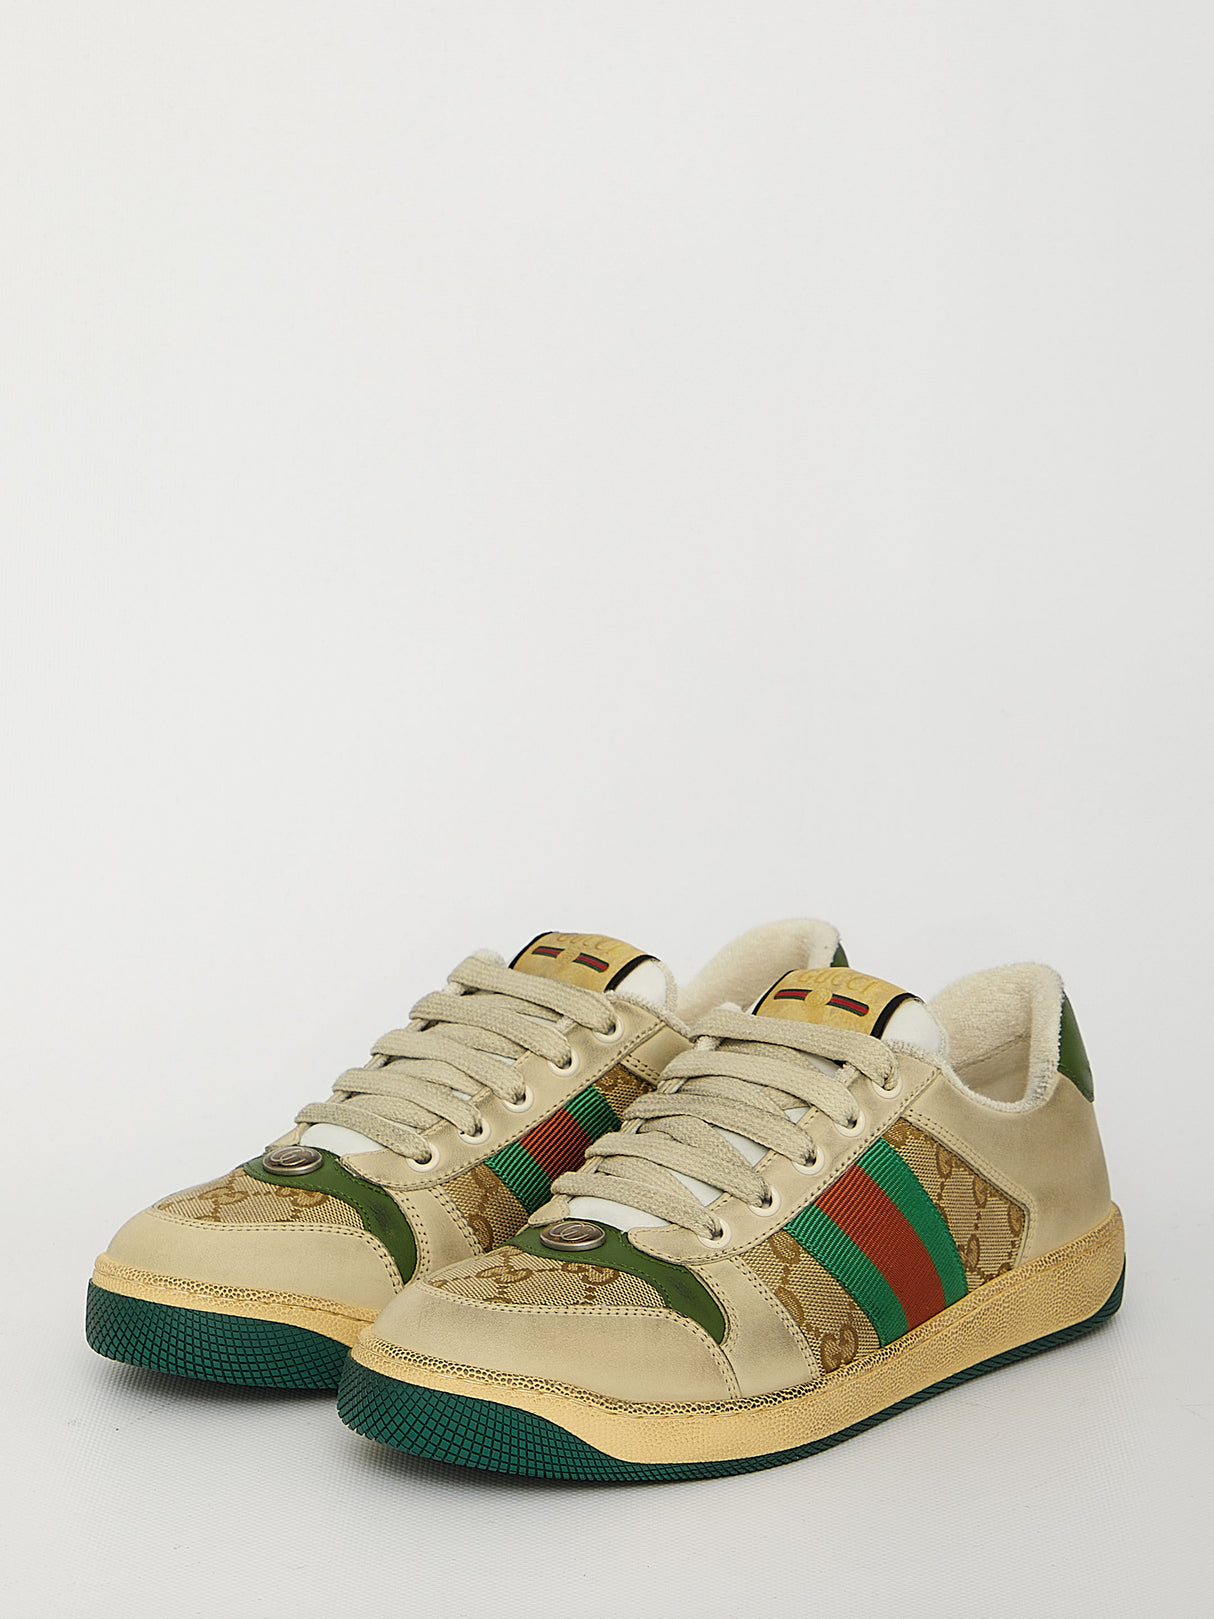 GUCCI Vintage Effect White Leather and Canvas Sneakers with Green and Orange Details for Men